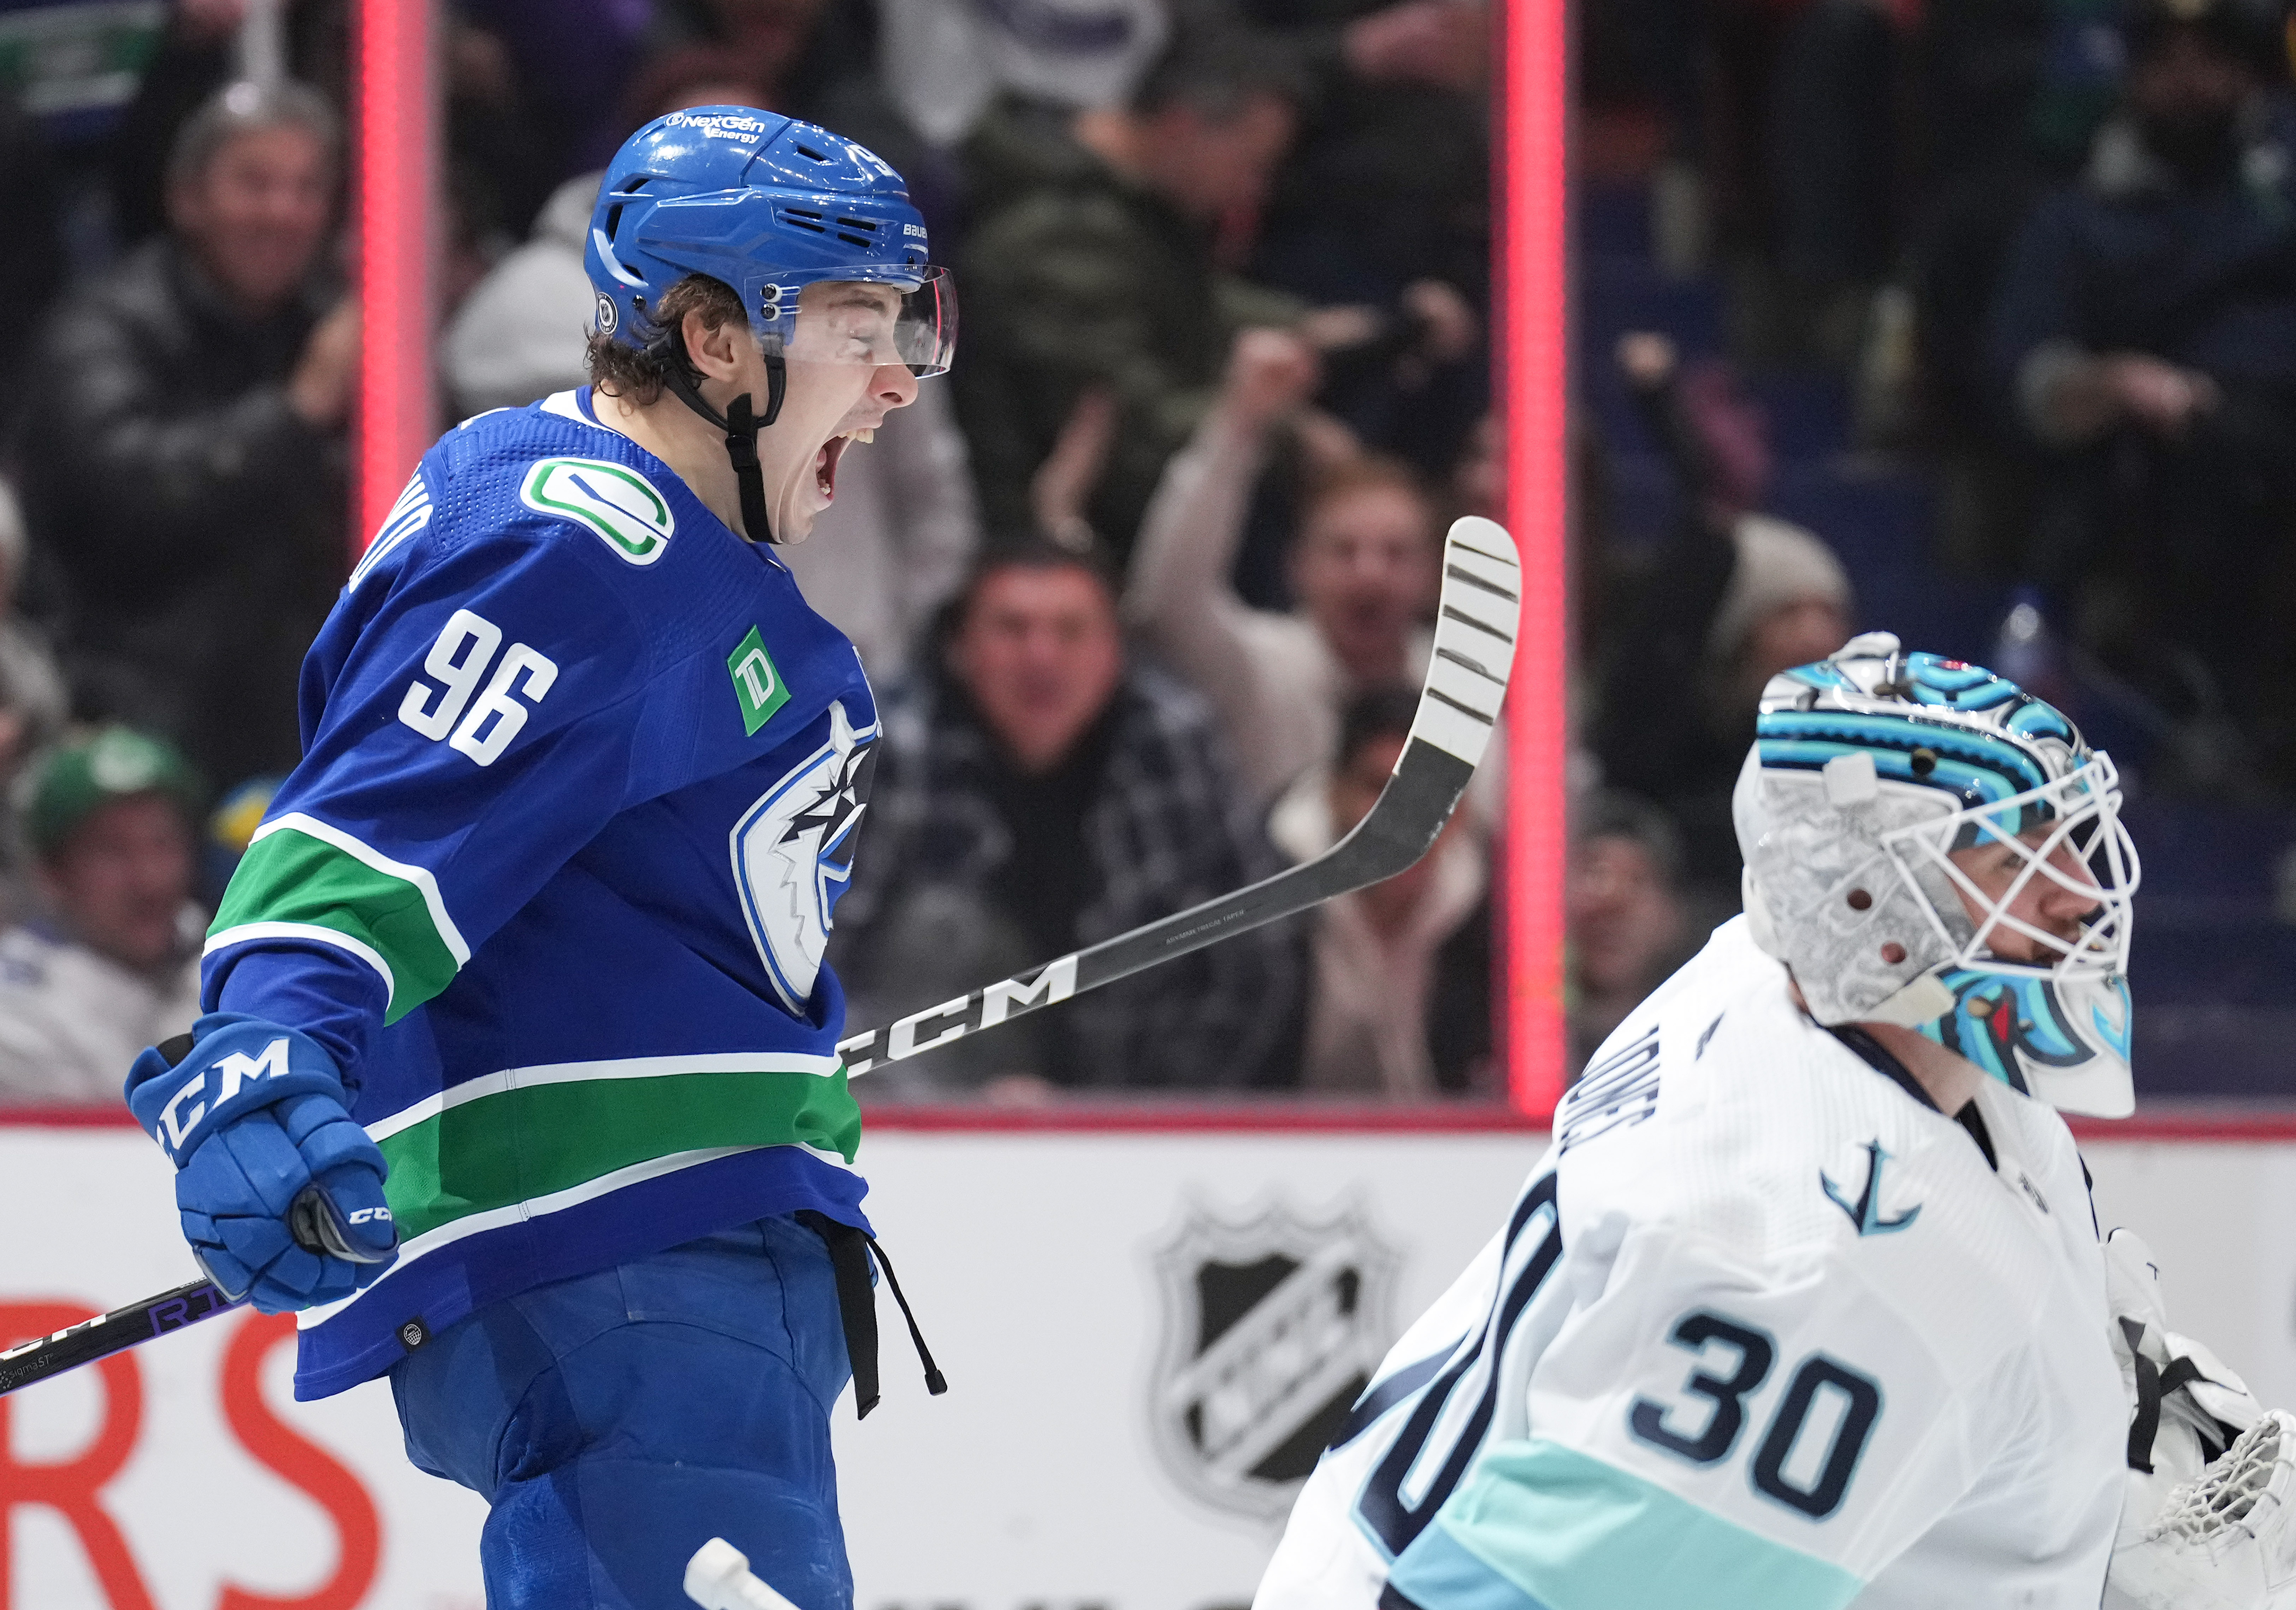 Pettersson lifts Canucks to 4-3 win over Predators in SO - The San